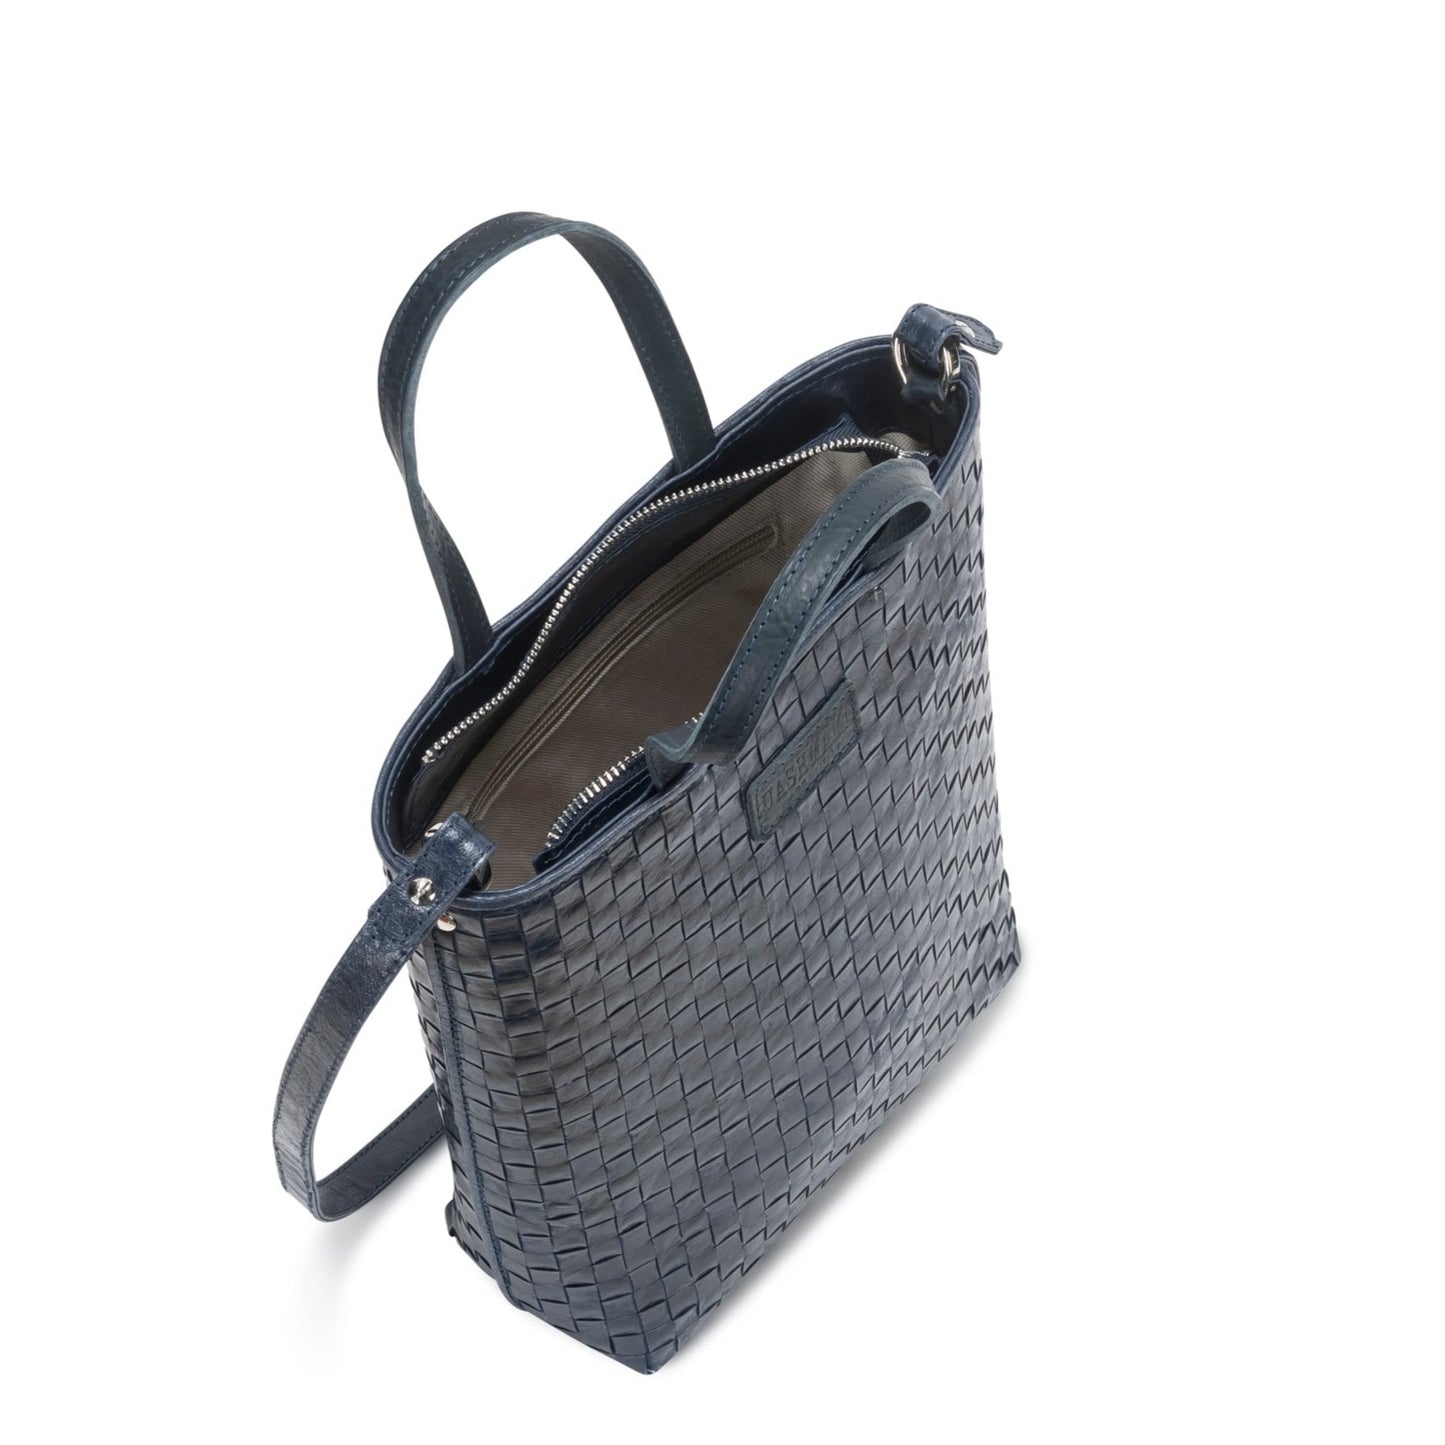 A woven washable paper tote bag is shown from a top-down angle, unzipped to reveal an inside zip pocket. It is navy in colour.